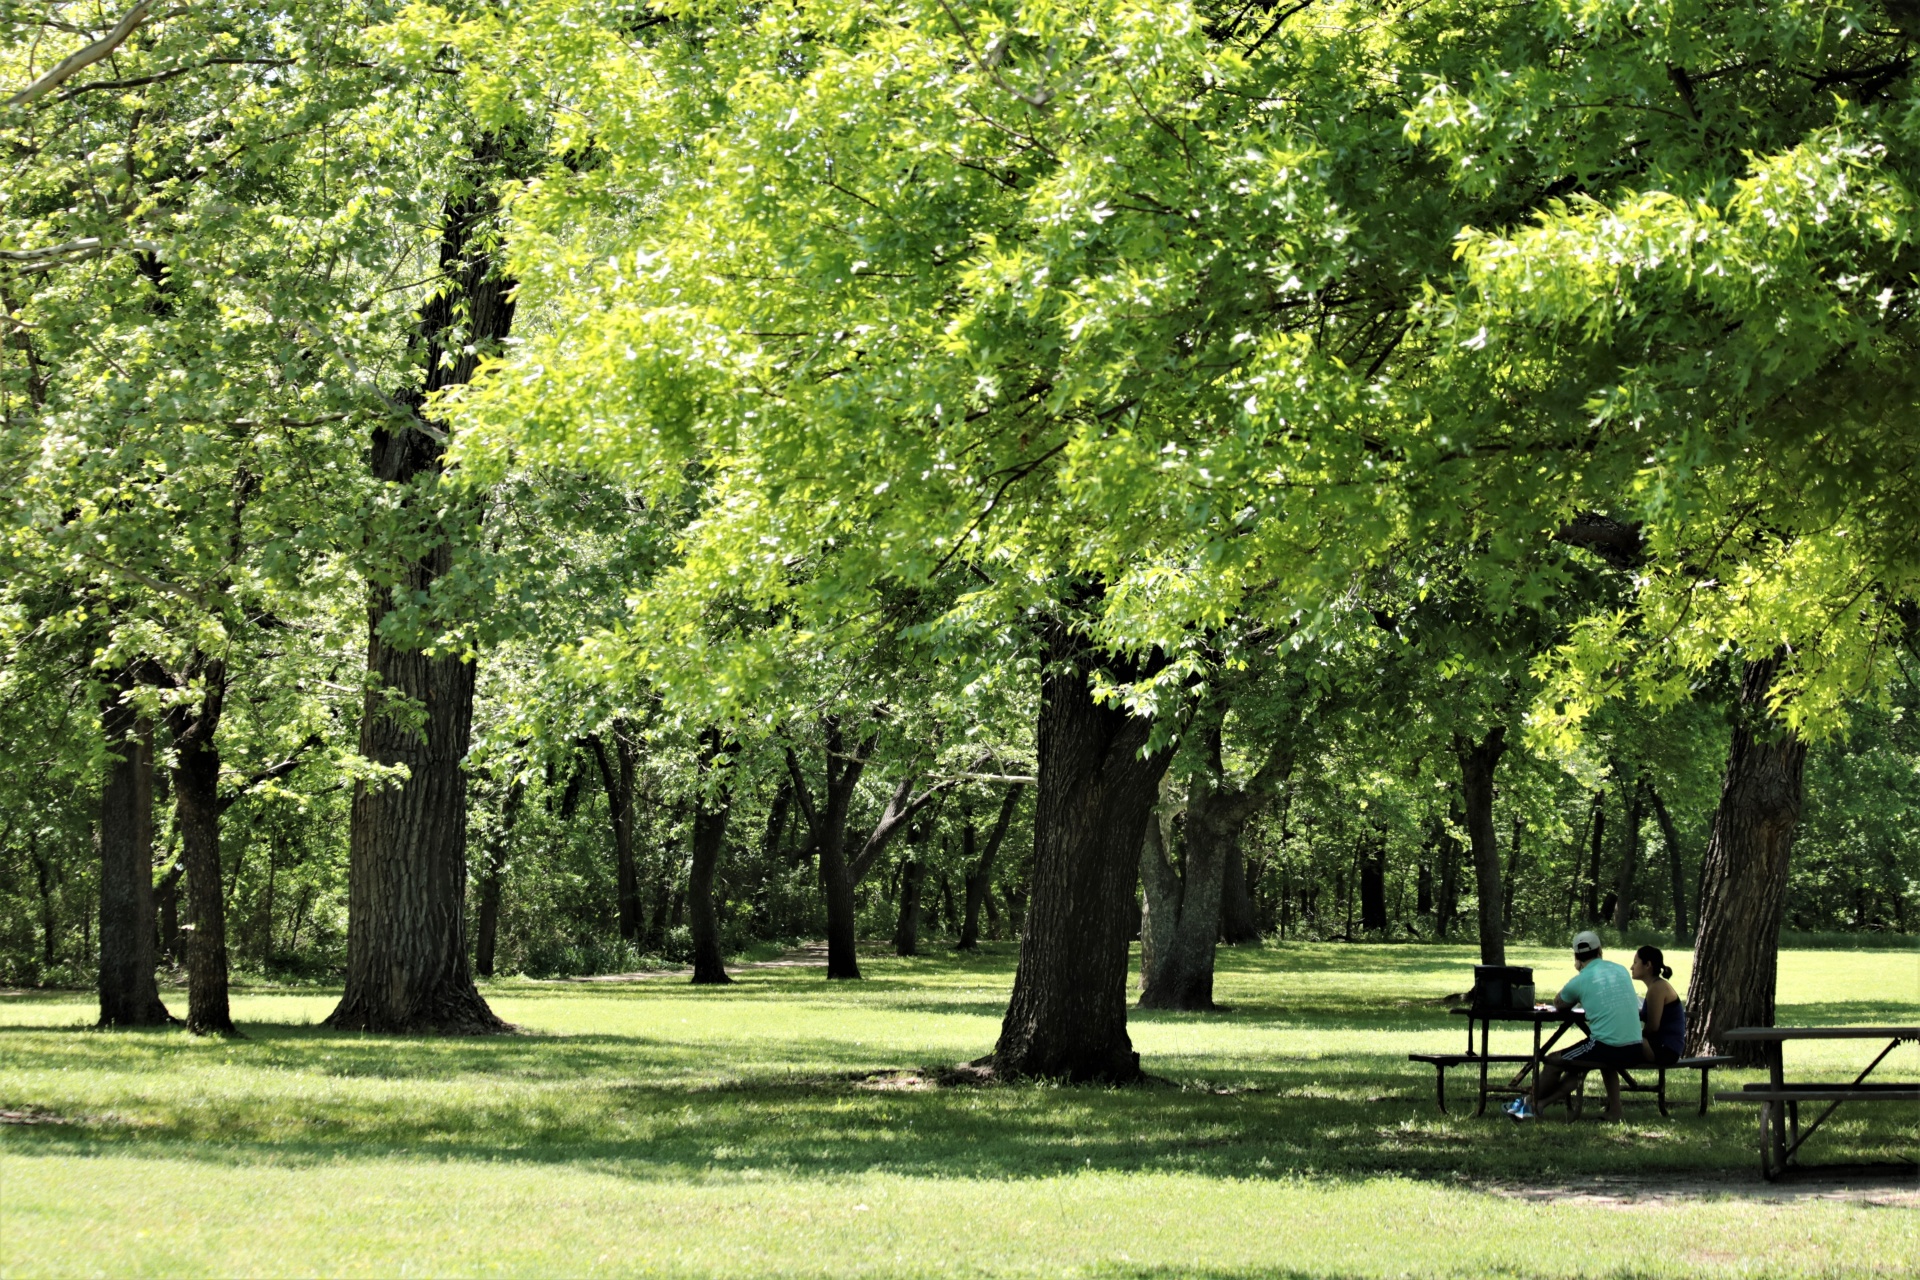 A young couple are sitting at a picnic table, under green trees, enjoying a beautiful green park on a spring afternoon.